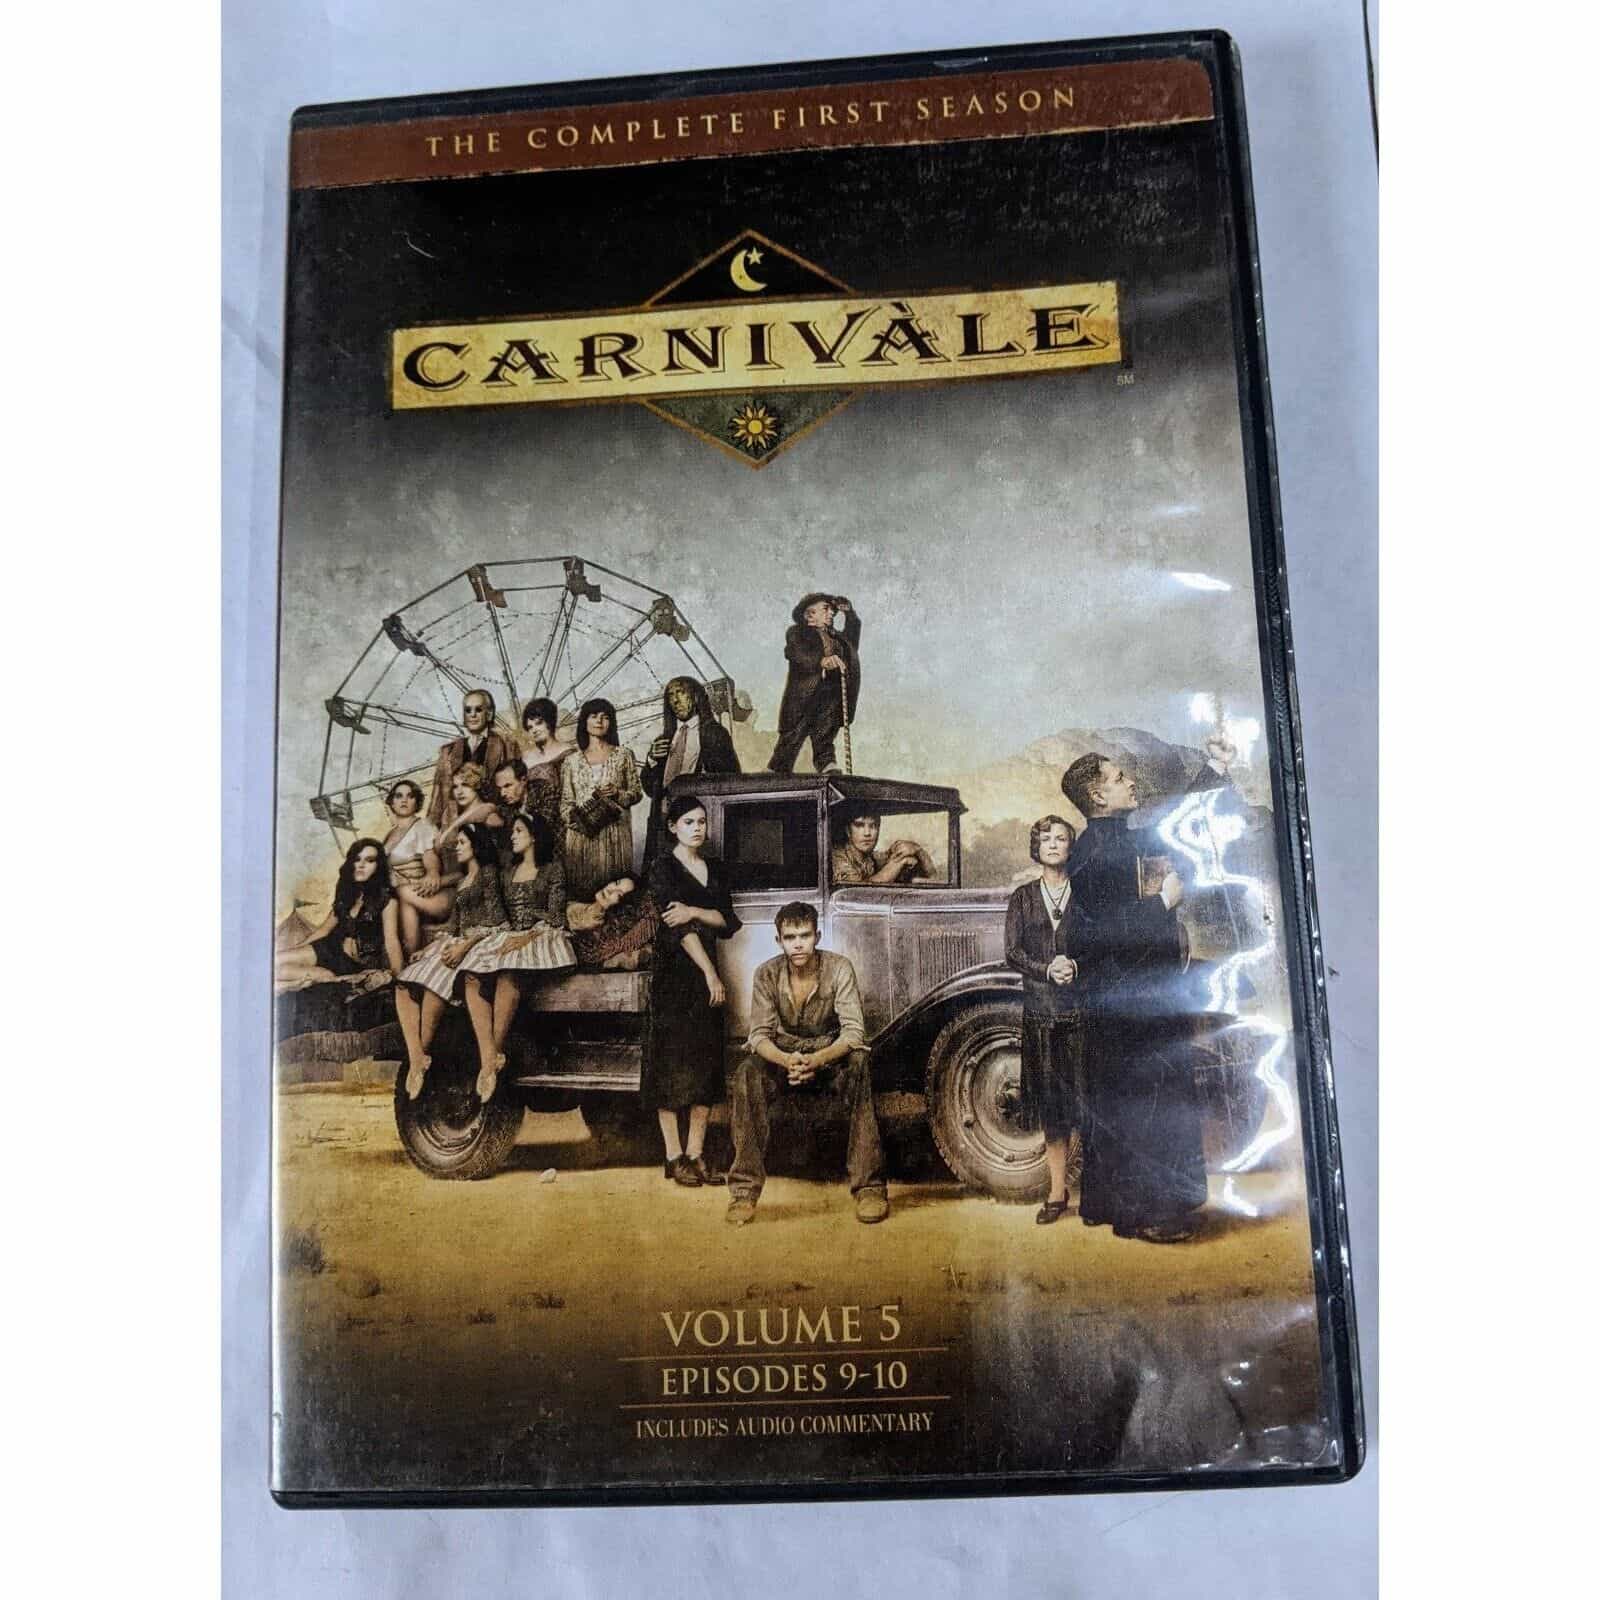 Carnivale Volume 5 of Season One DVD TV Show Replacement Disc